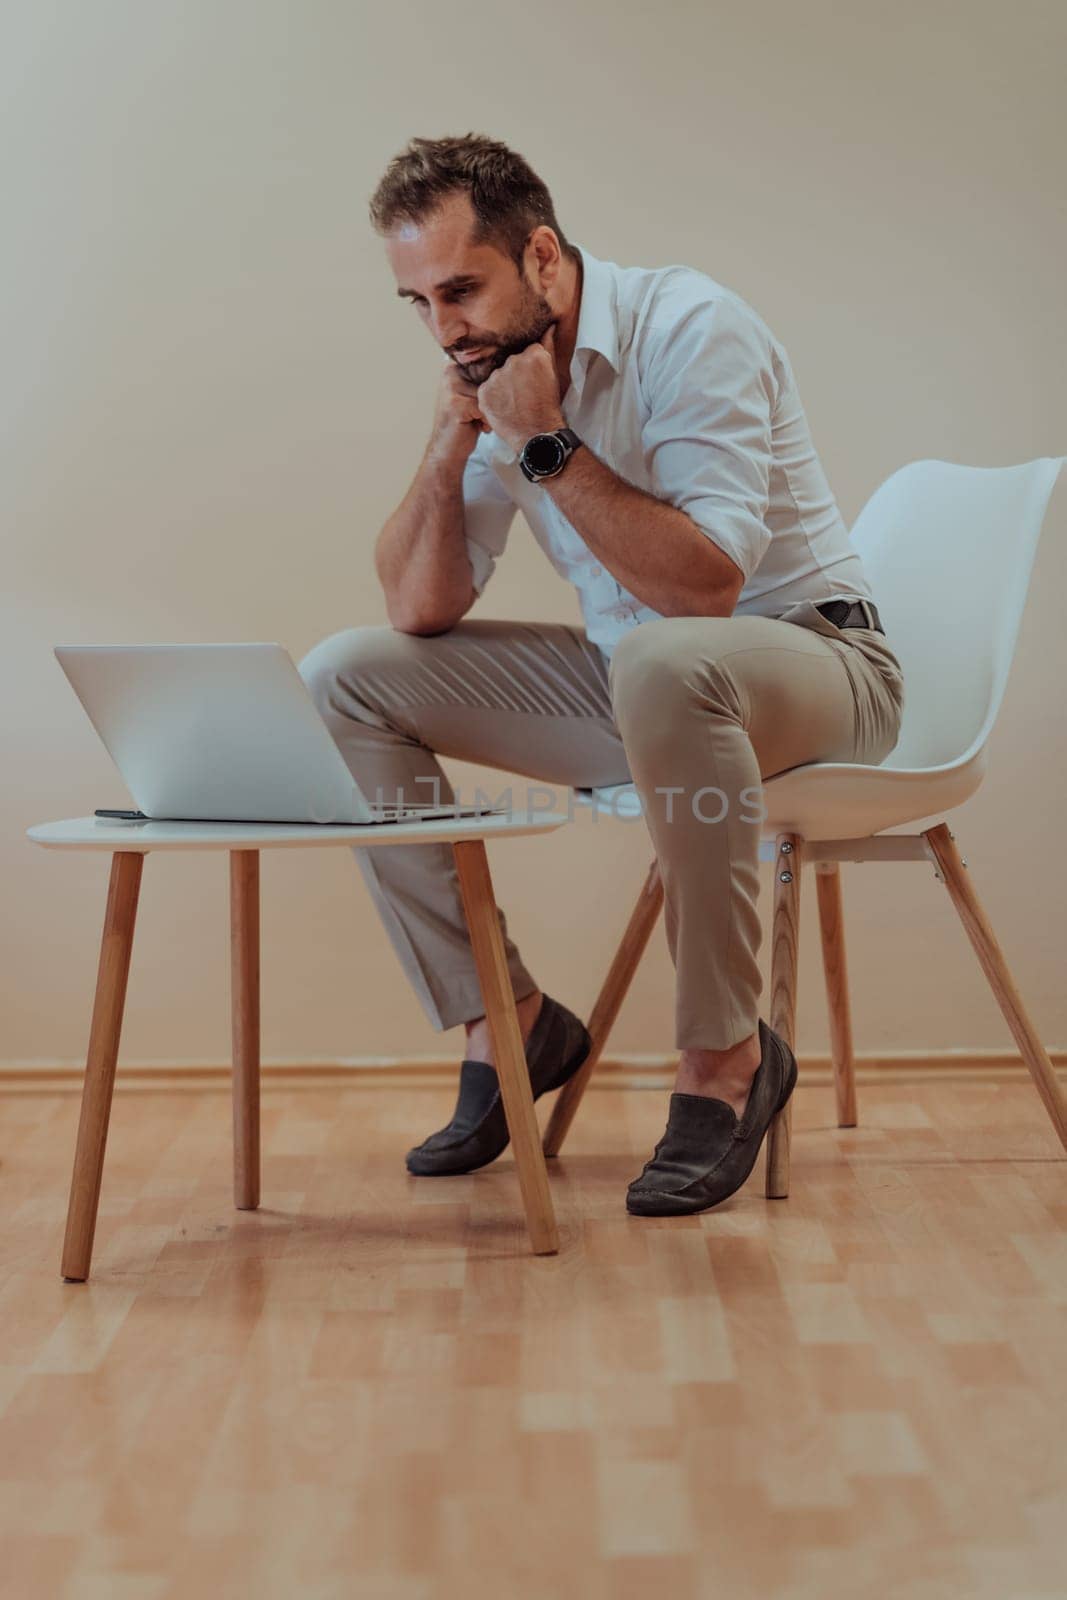 A confident businessman sitting and using laptop with a determined expression, while a beige background enhances the professional atmosphere, showcasing his productivity and expertise. by dotshock